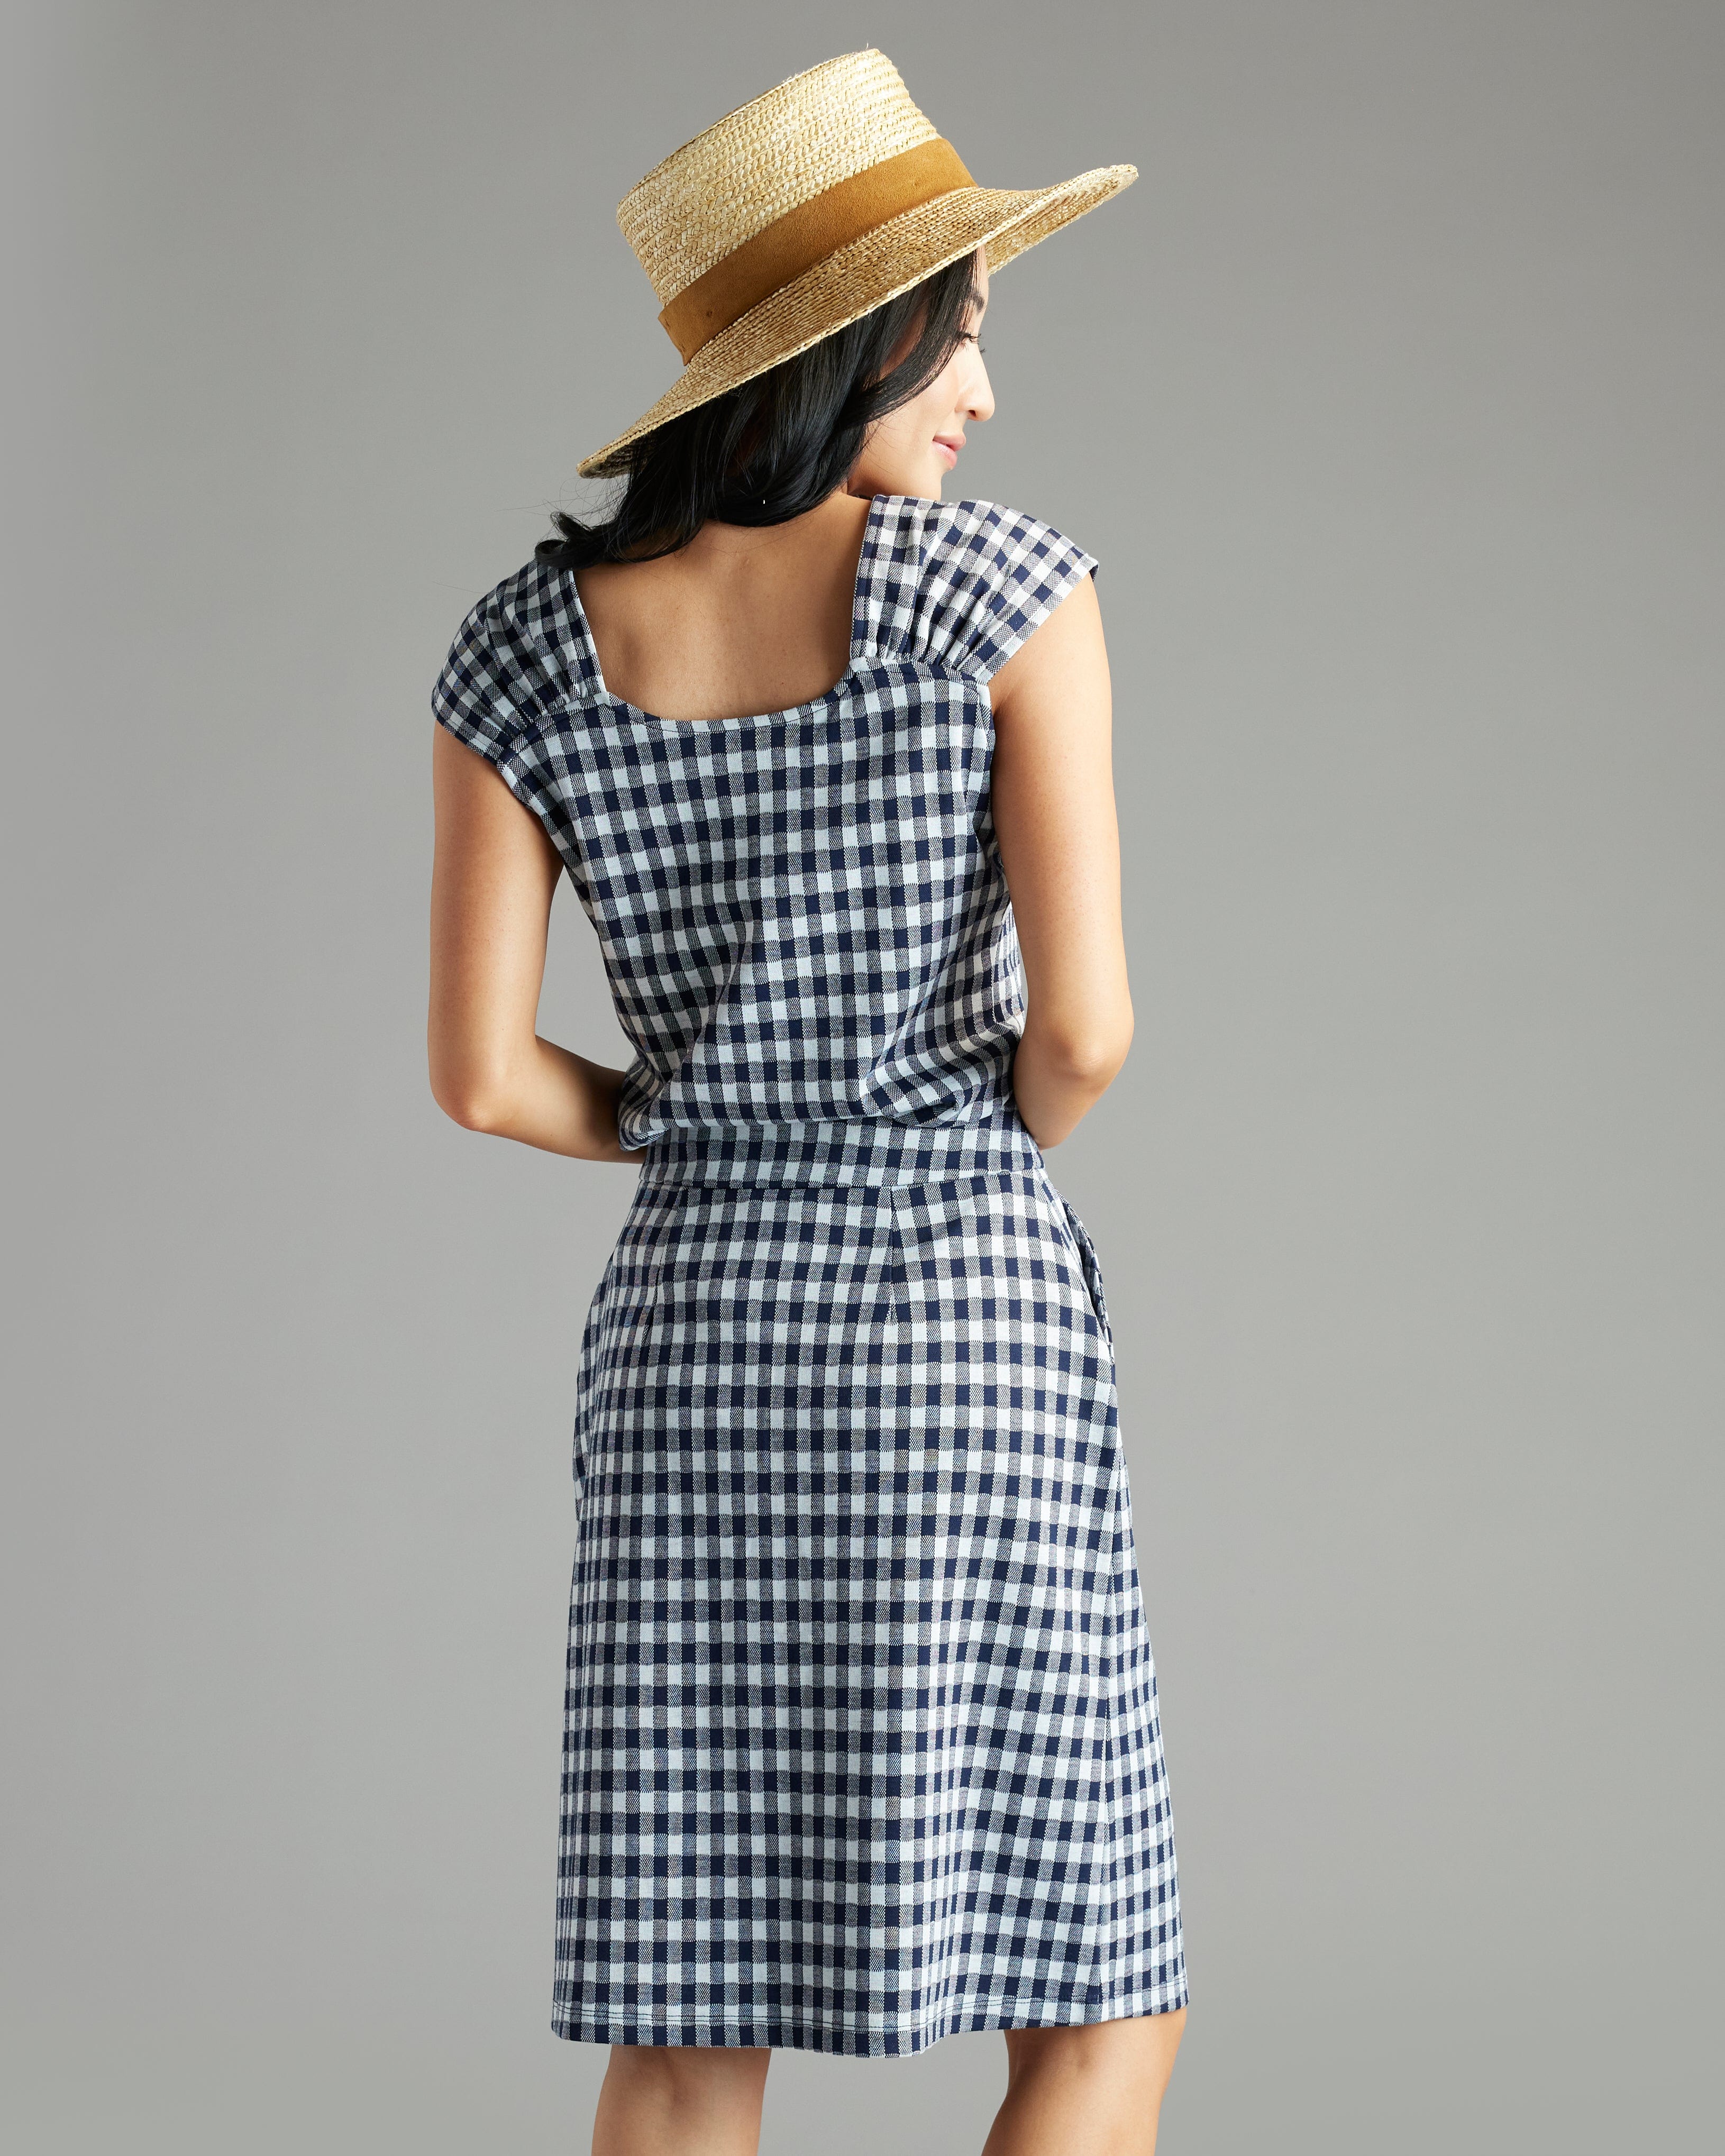 Woman in navy and white gingham knee-length skirt